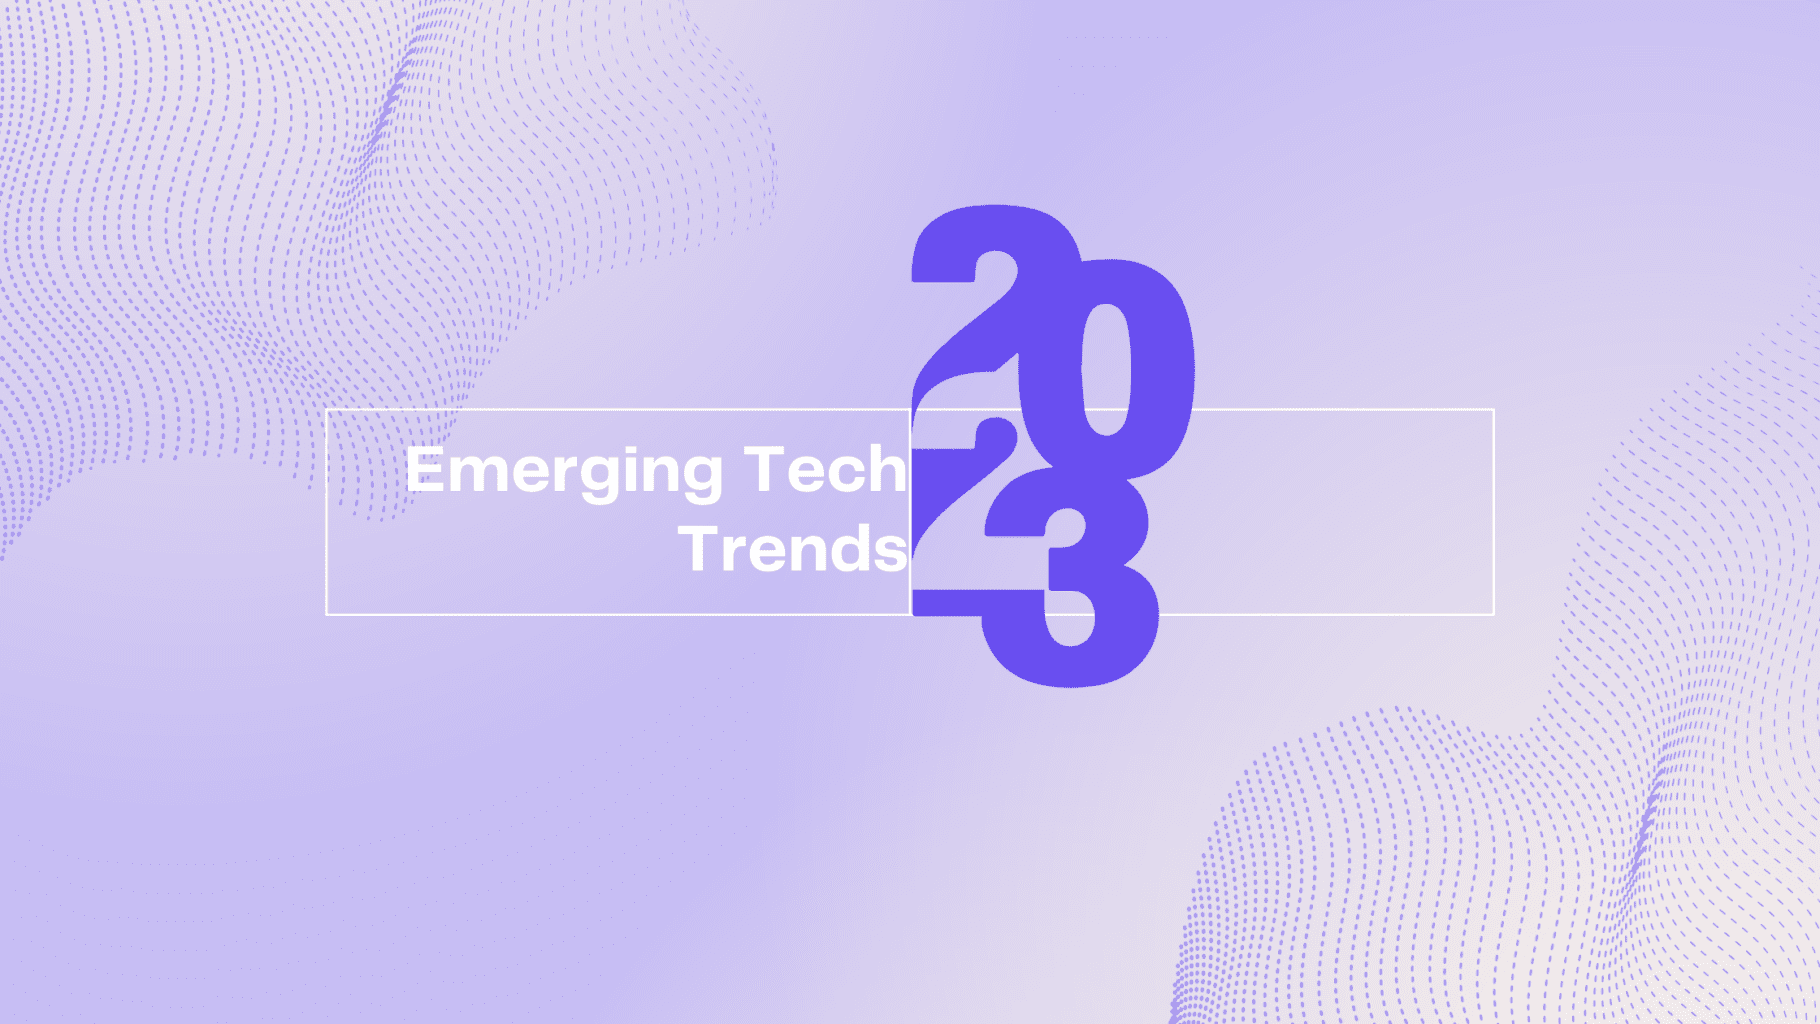 5 Emerging tech trends for 2023